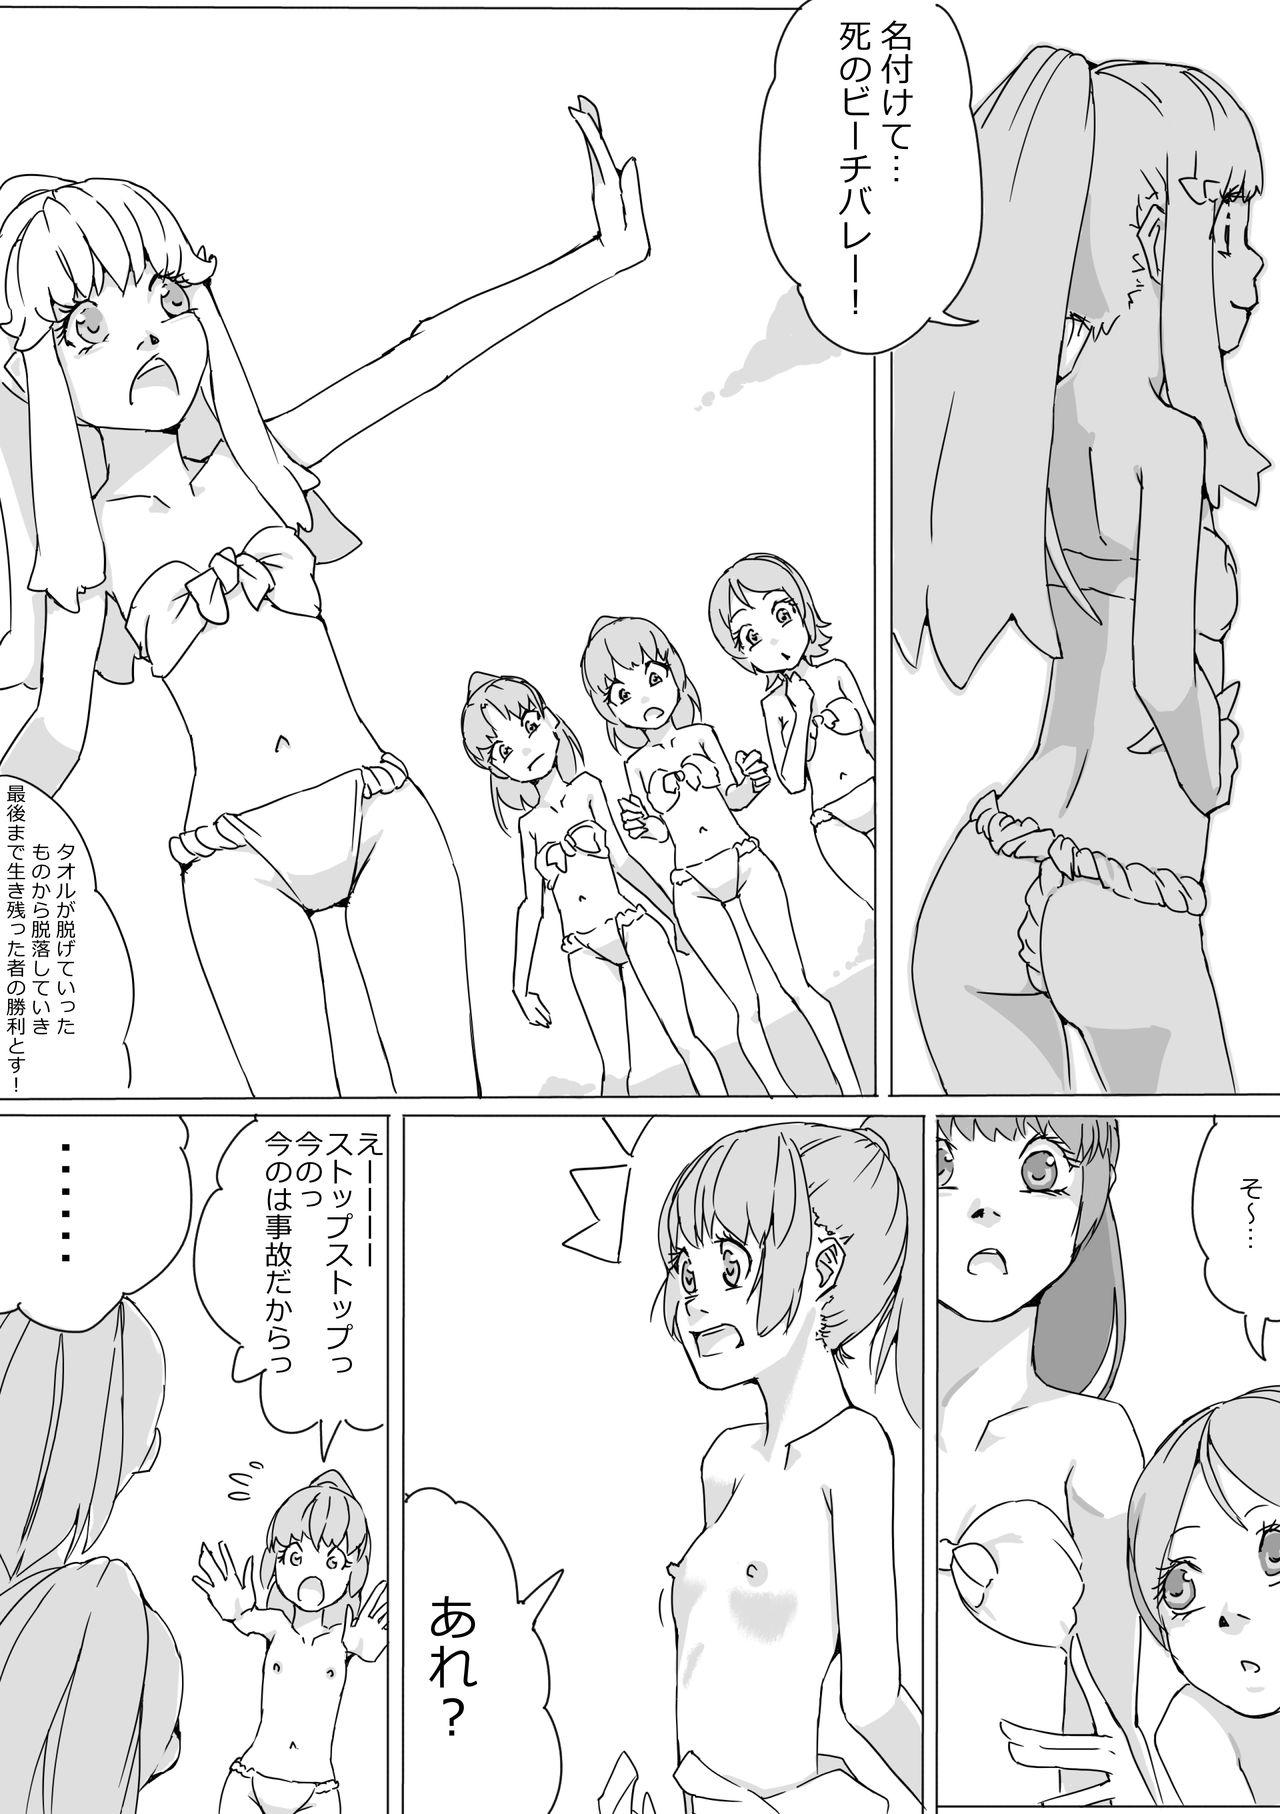 Real Untitled Precure Doujinshi - Pretty cure Abg - Page 6